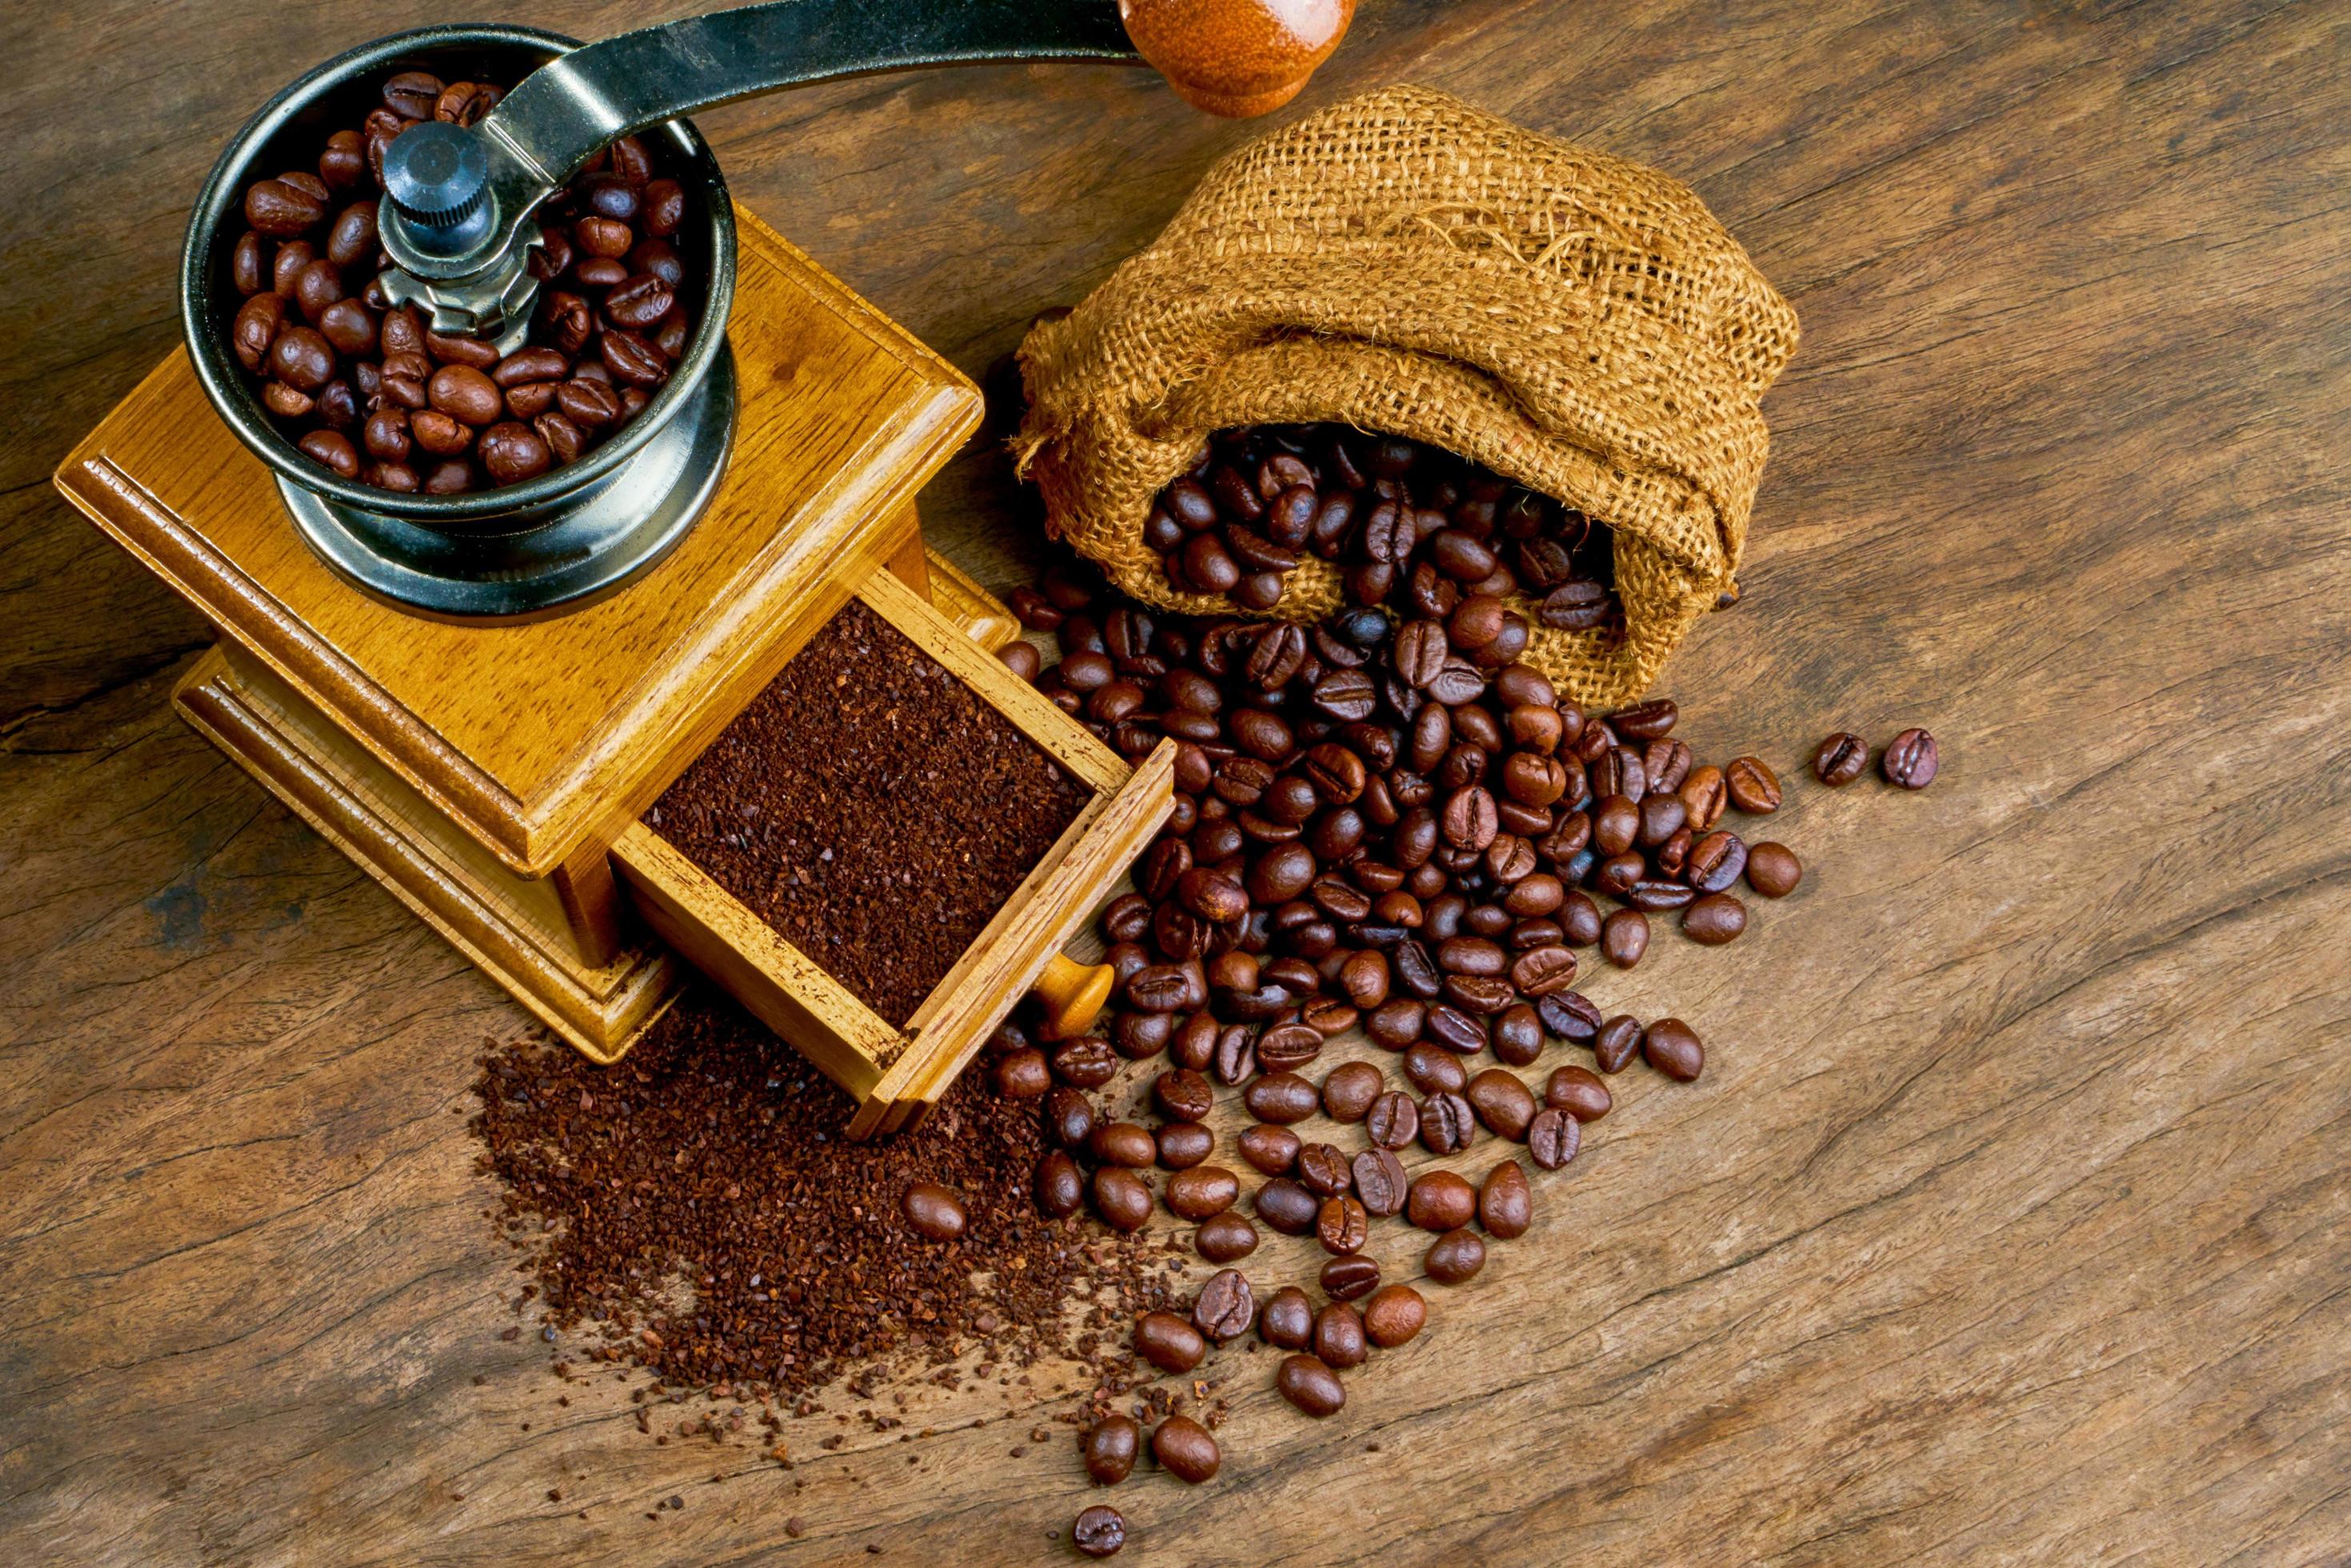 Coarse ground coffee bean in a coffee grinder Stock Photo - Alamy